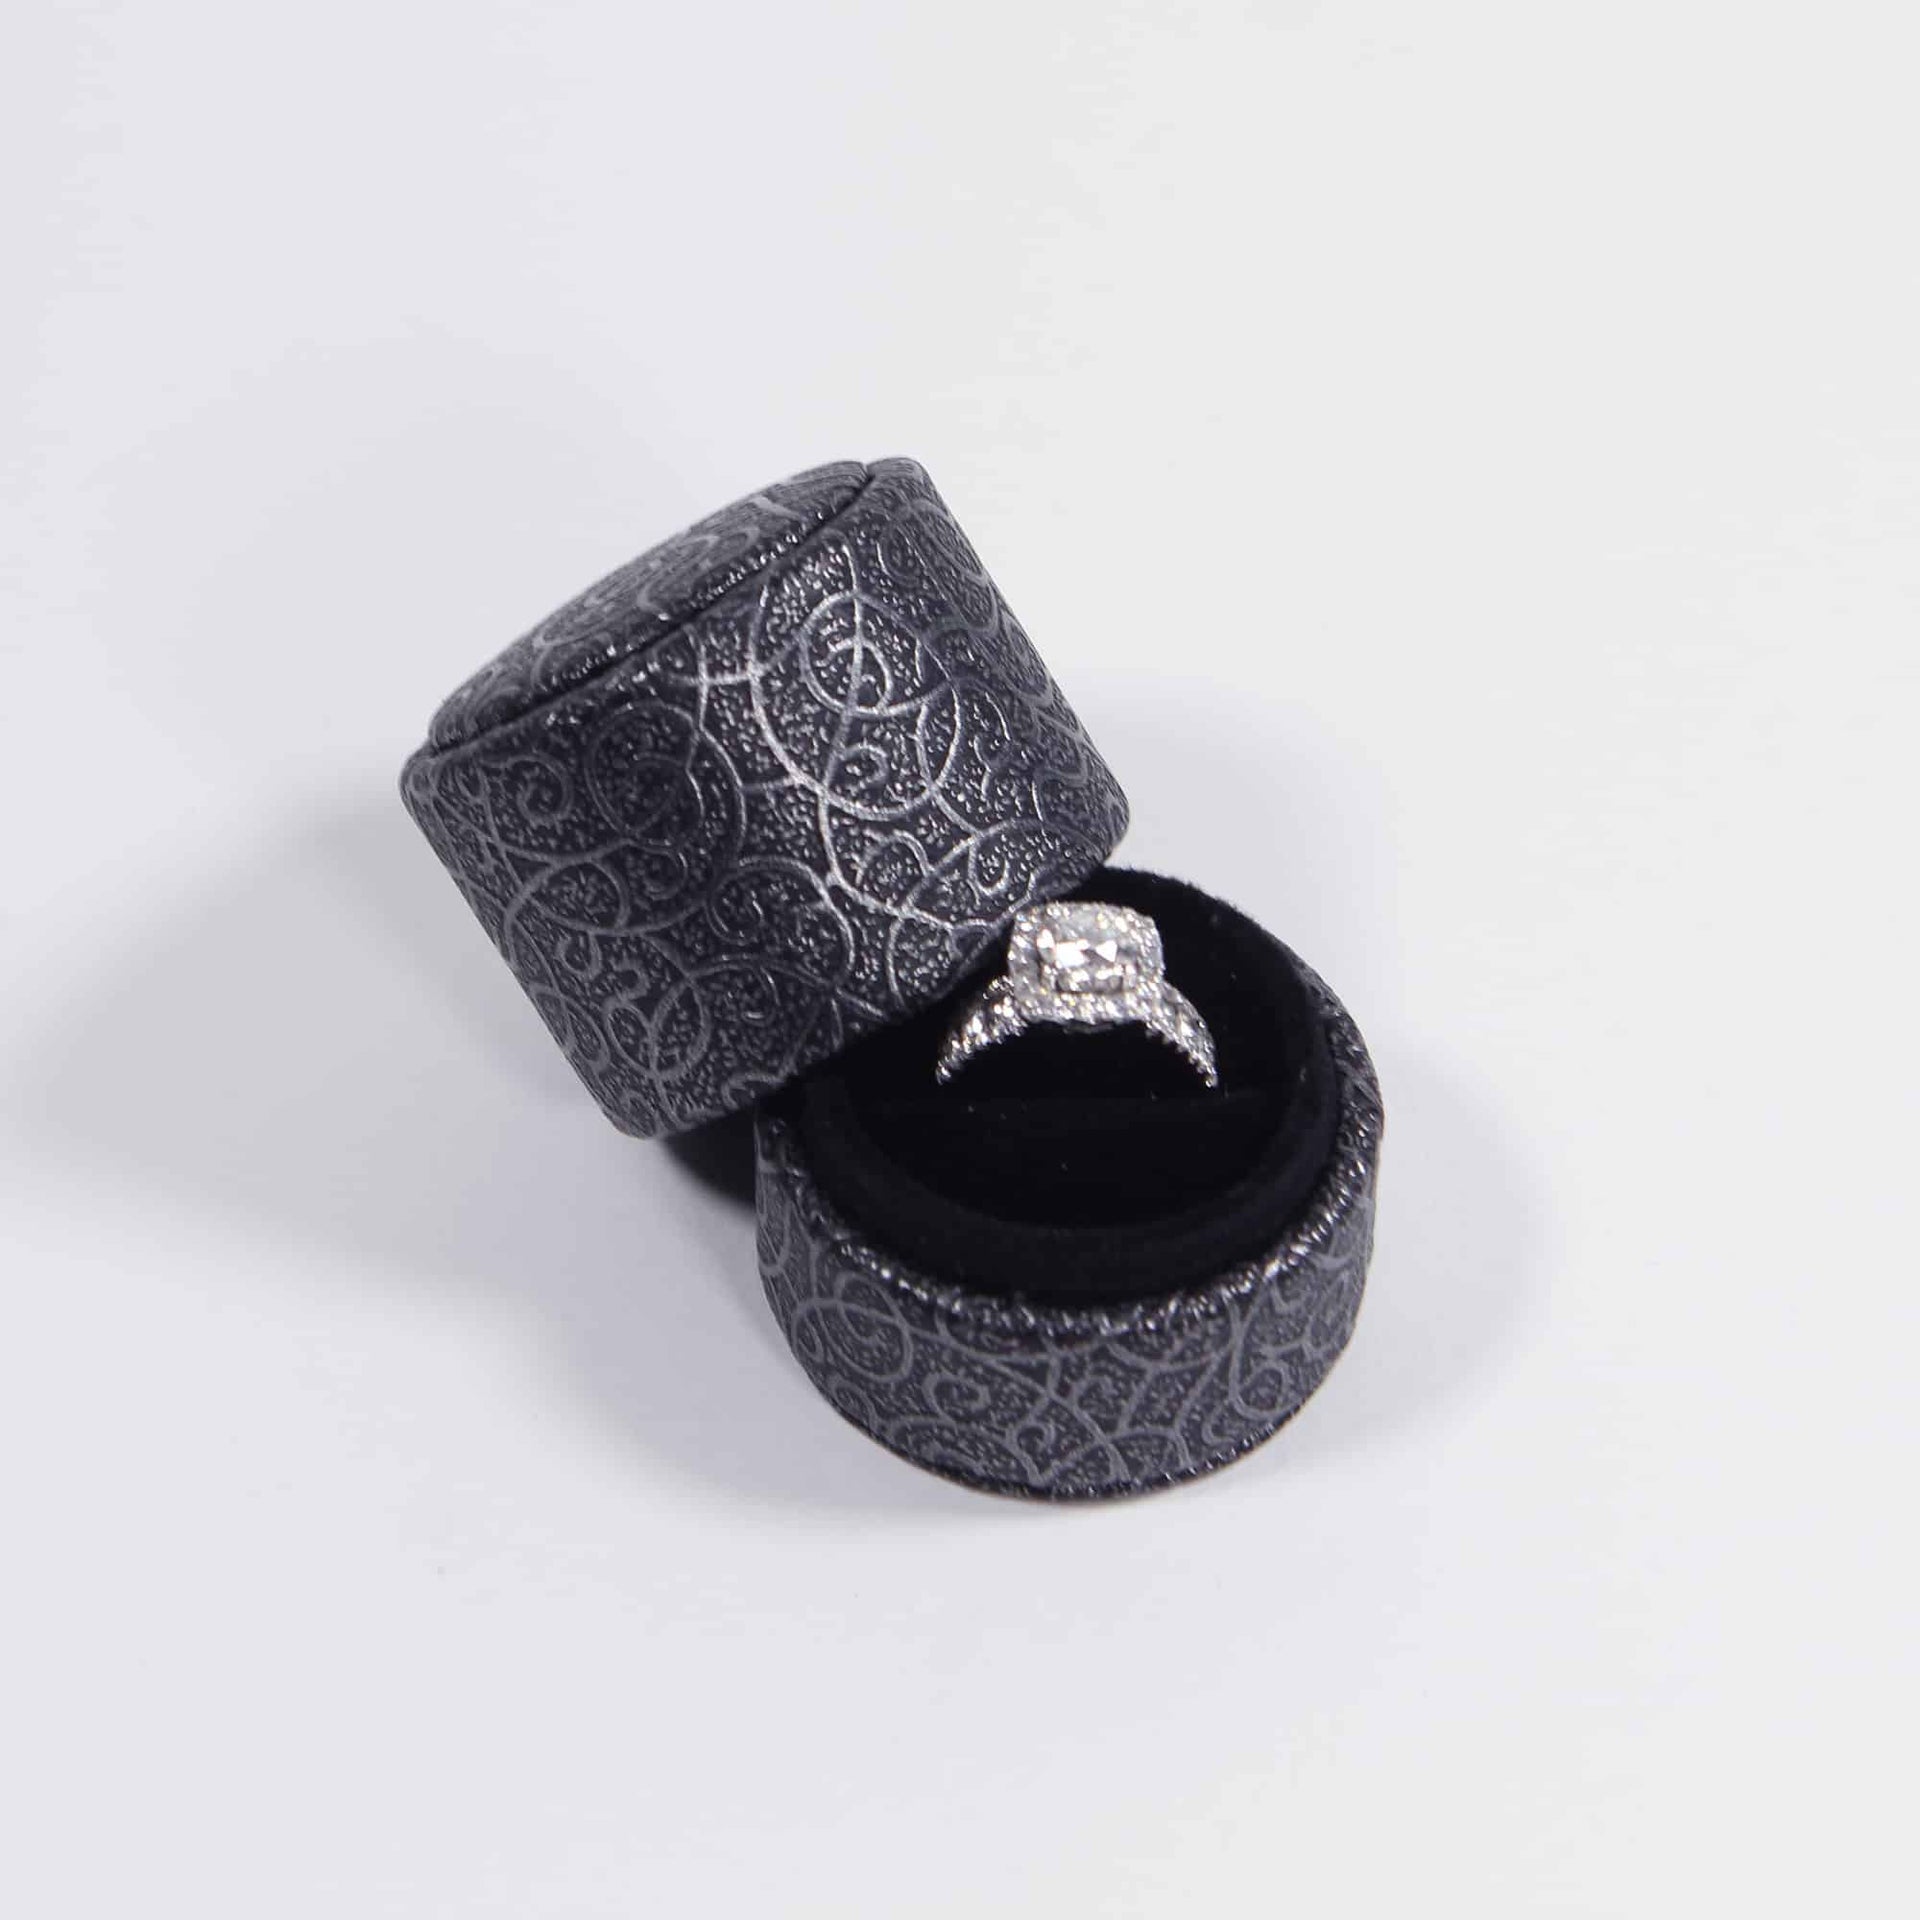 small proposal ring box for weddings, gifts, anniversaries with diamond ring